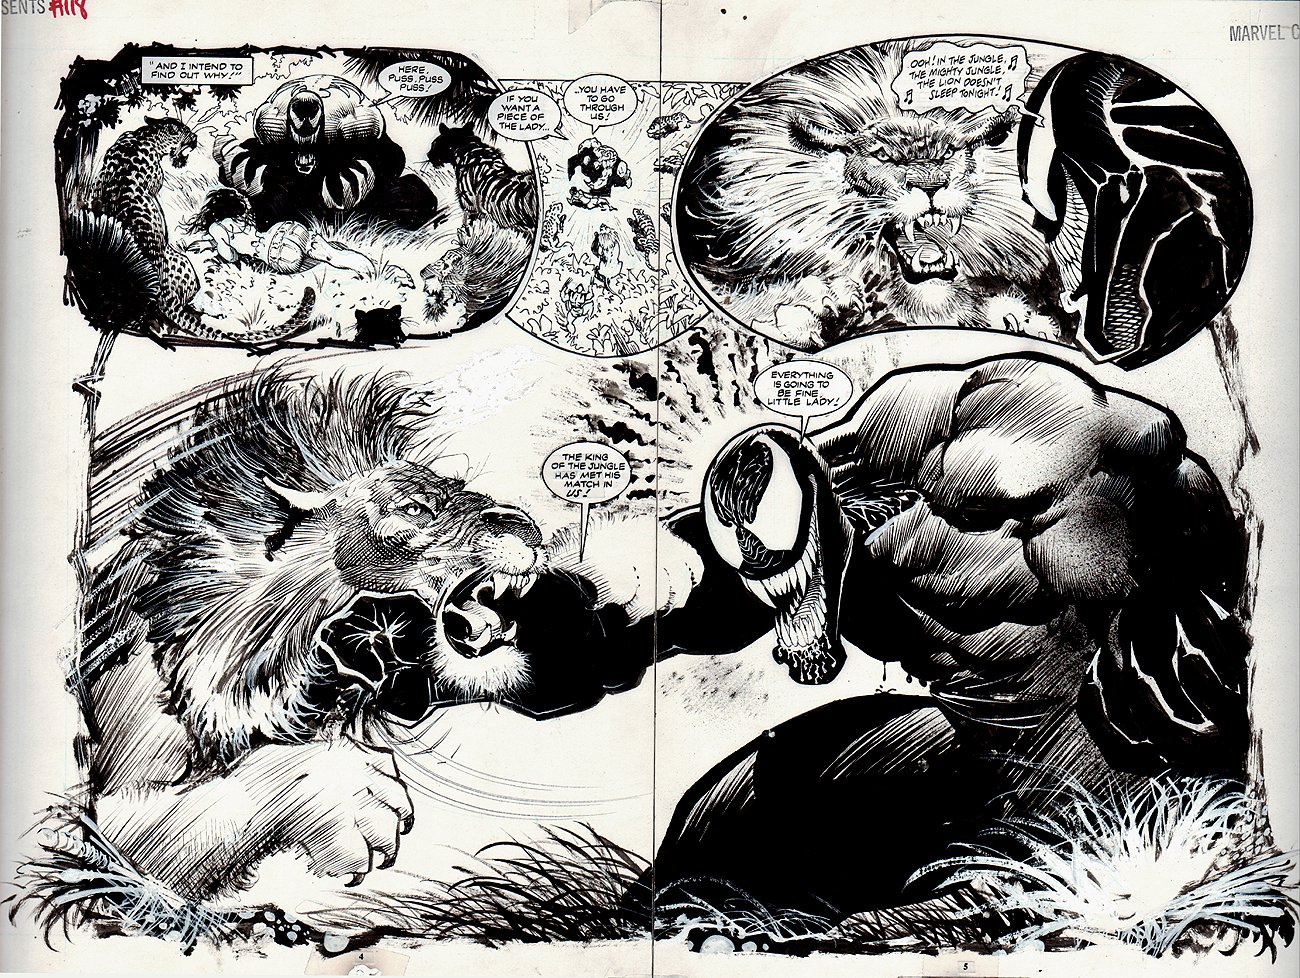 Double Page Splash – Comprises of two pages where the character and background fills both pages. An awesome Venom double-page splash by artist Sam Keith.